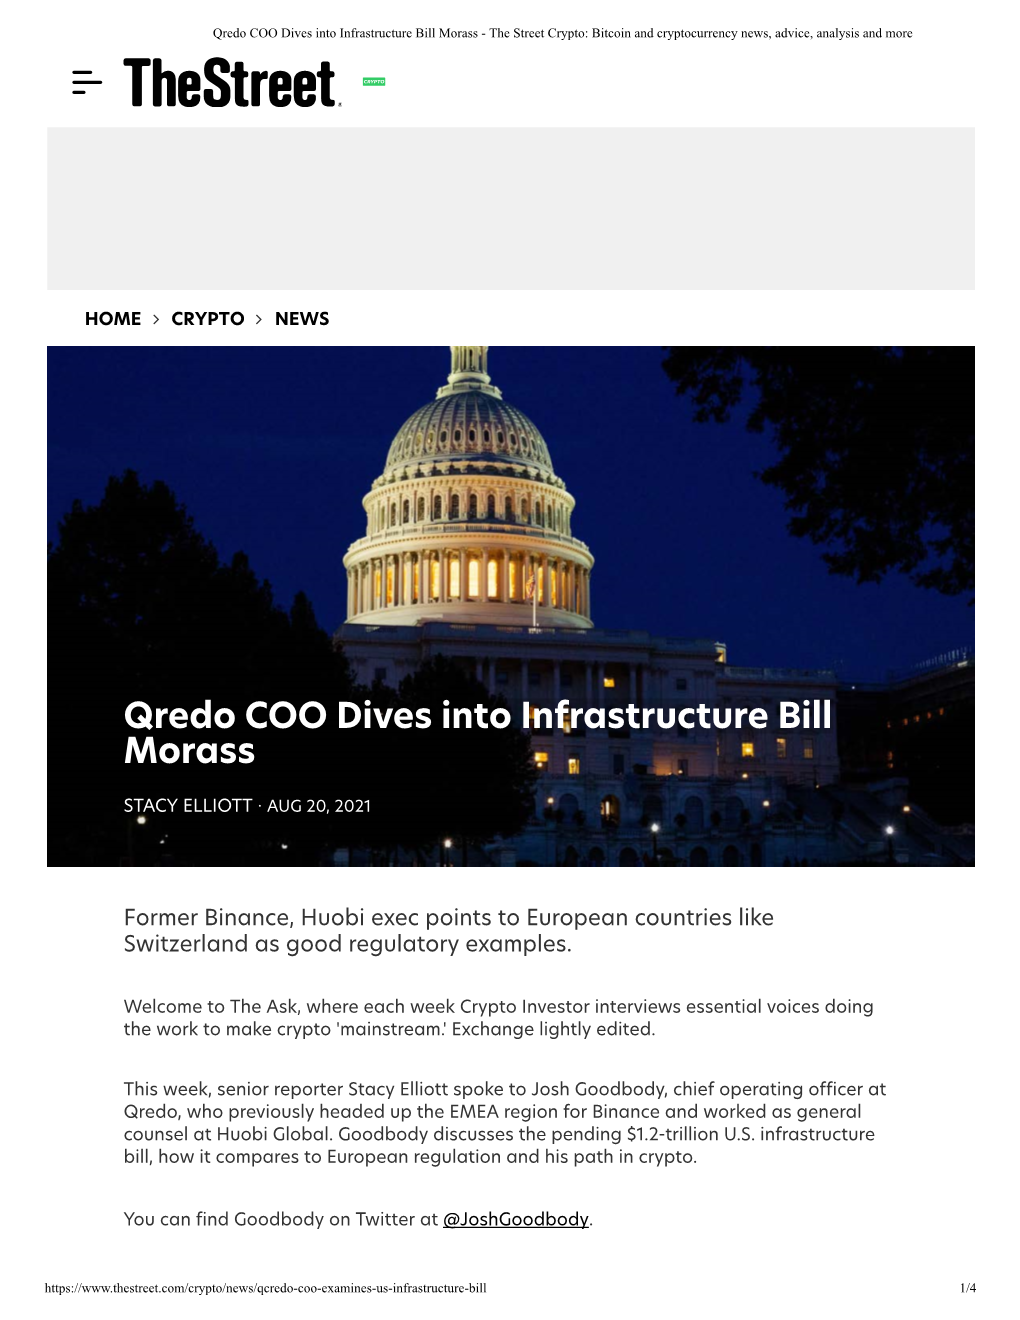 Qredo COO Dives Into Infrastructure Bill Morass - the Street Crypto: Bitcoin and Cryptocurrency News, Advice, Analysis and More